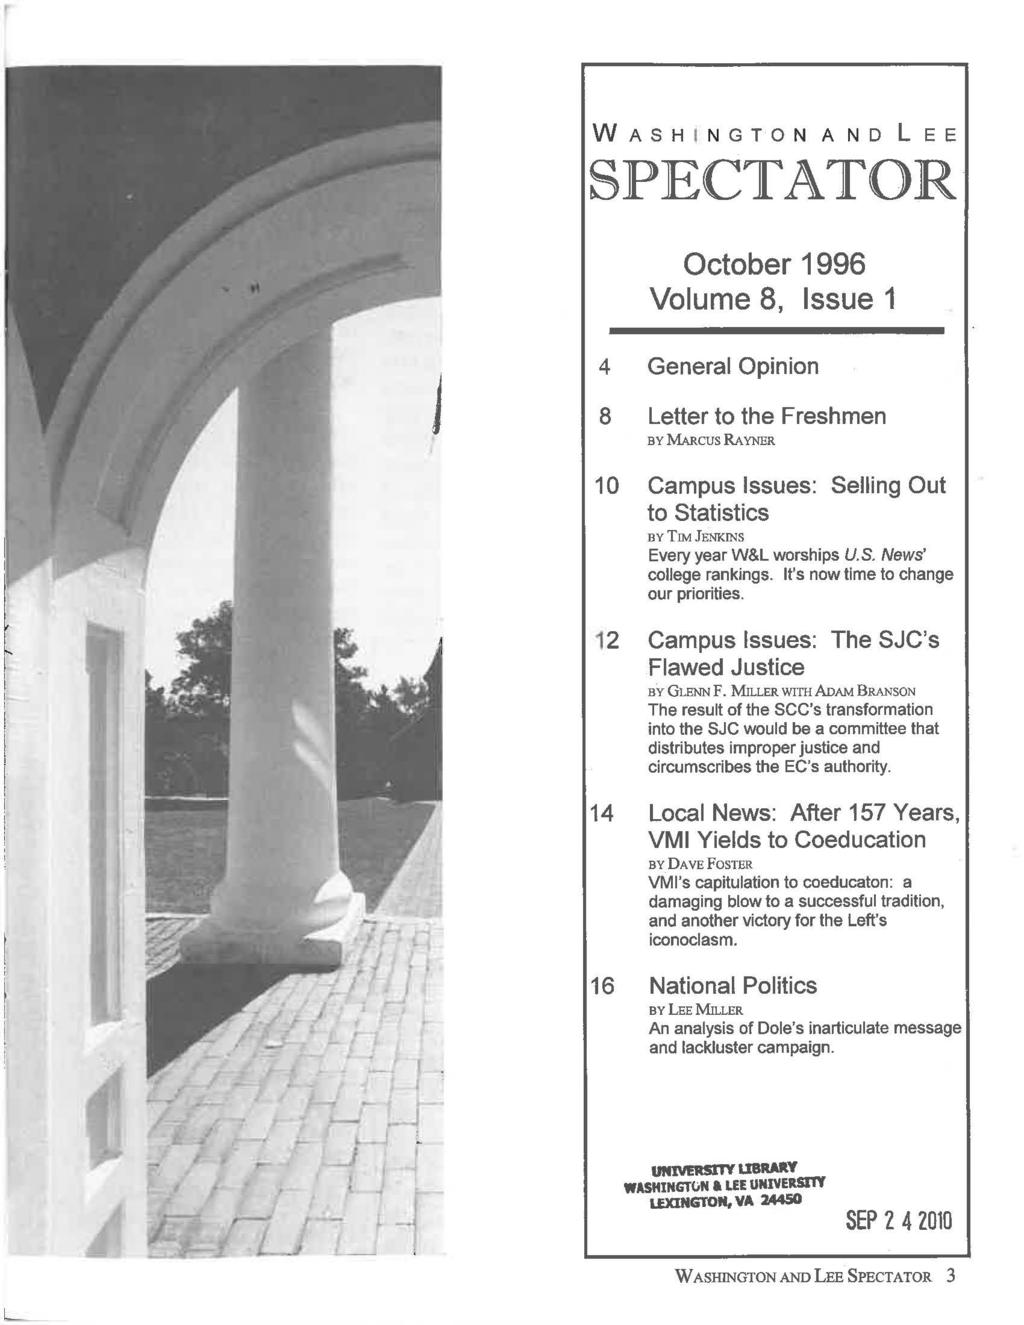 L WASH I N GTO N AN D LEE SPECTATOR October 1996 Volume 8, Issue 1 4 General Opinion 8 Letter to the Freshmen BY MAR.